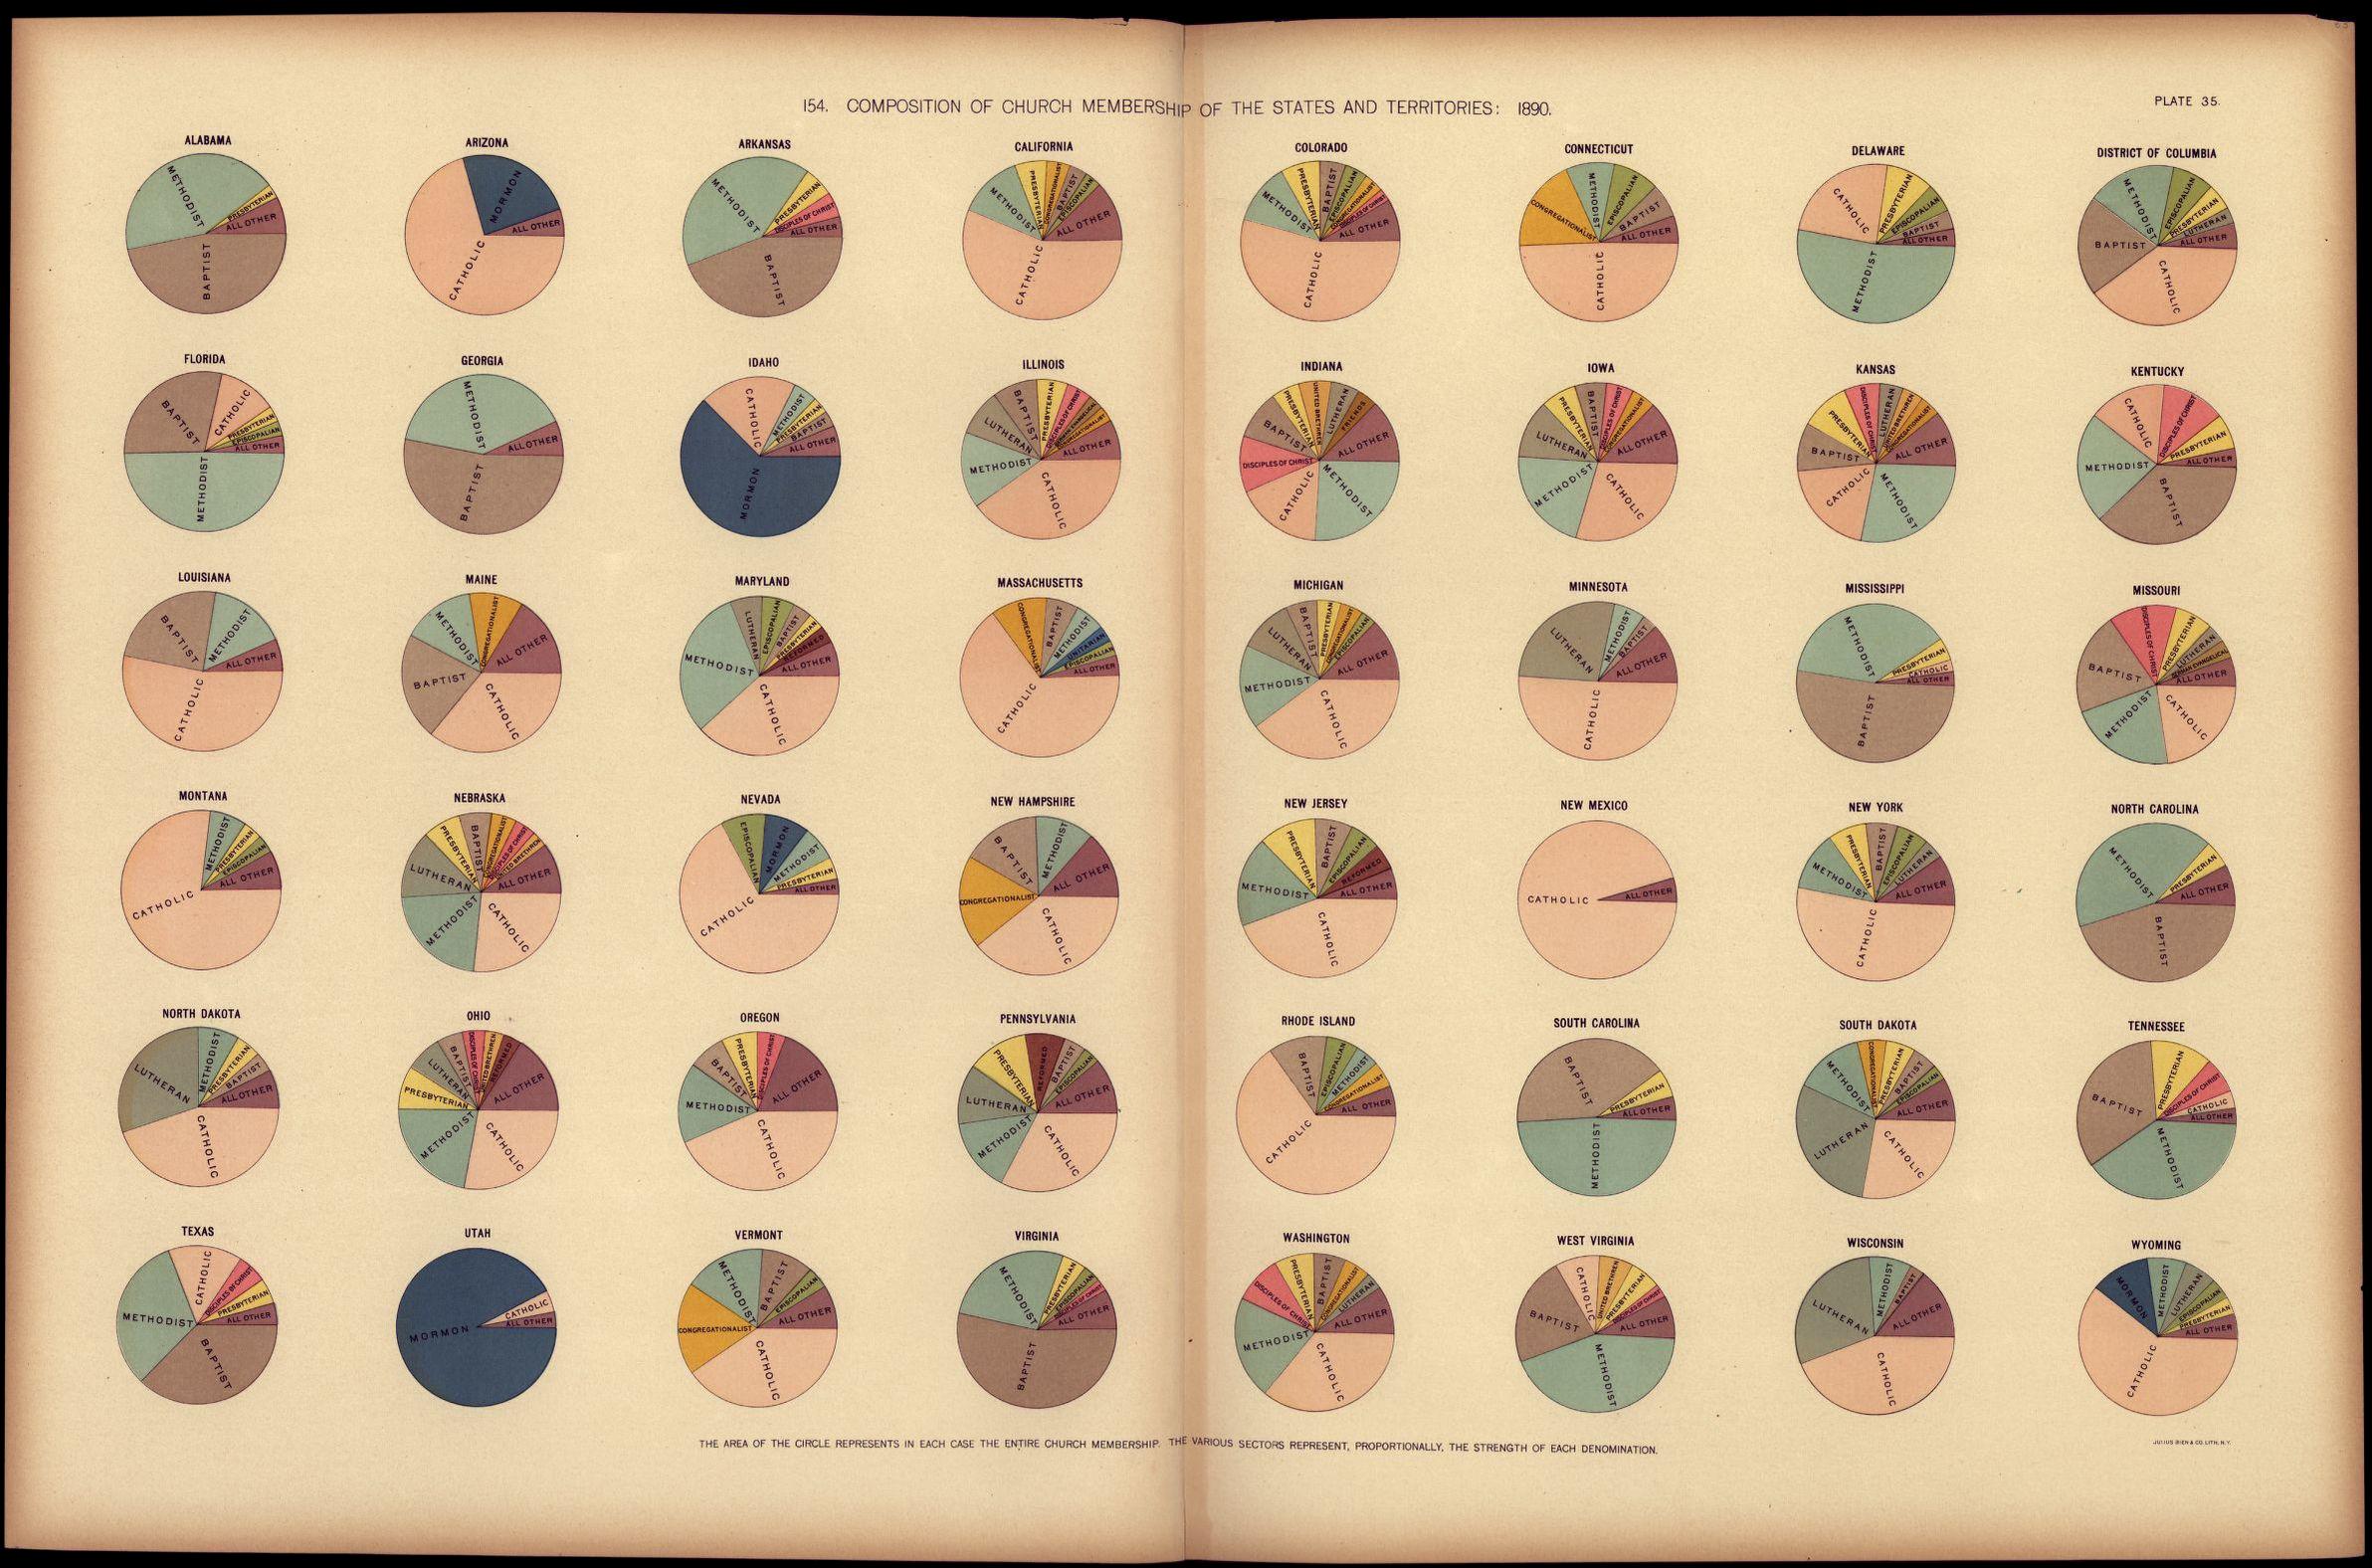 Composition of church membership of the states and territories: 1890